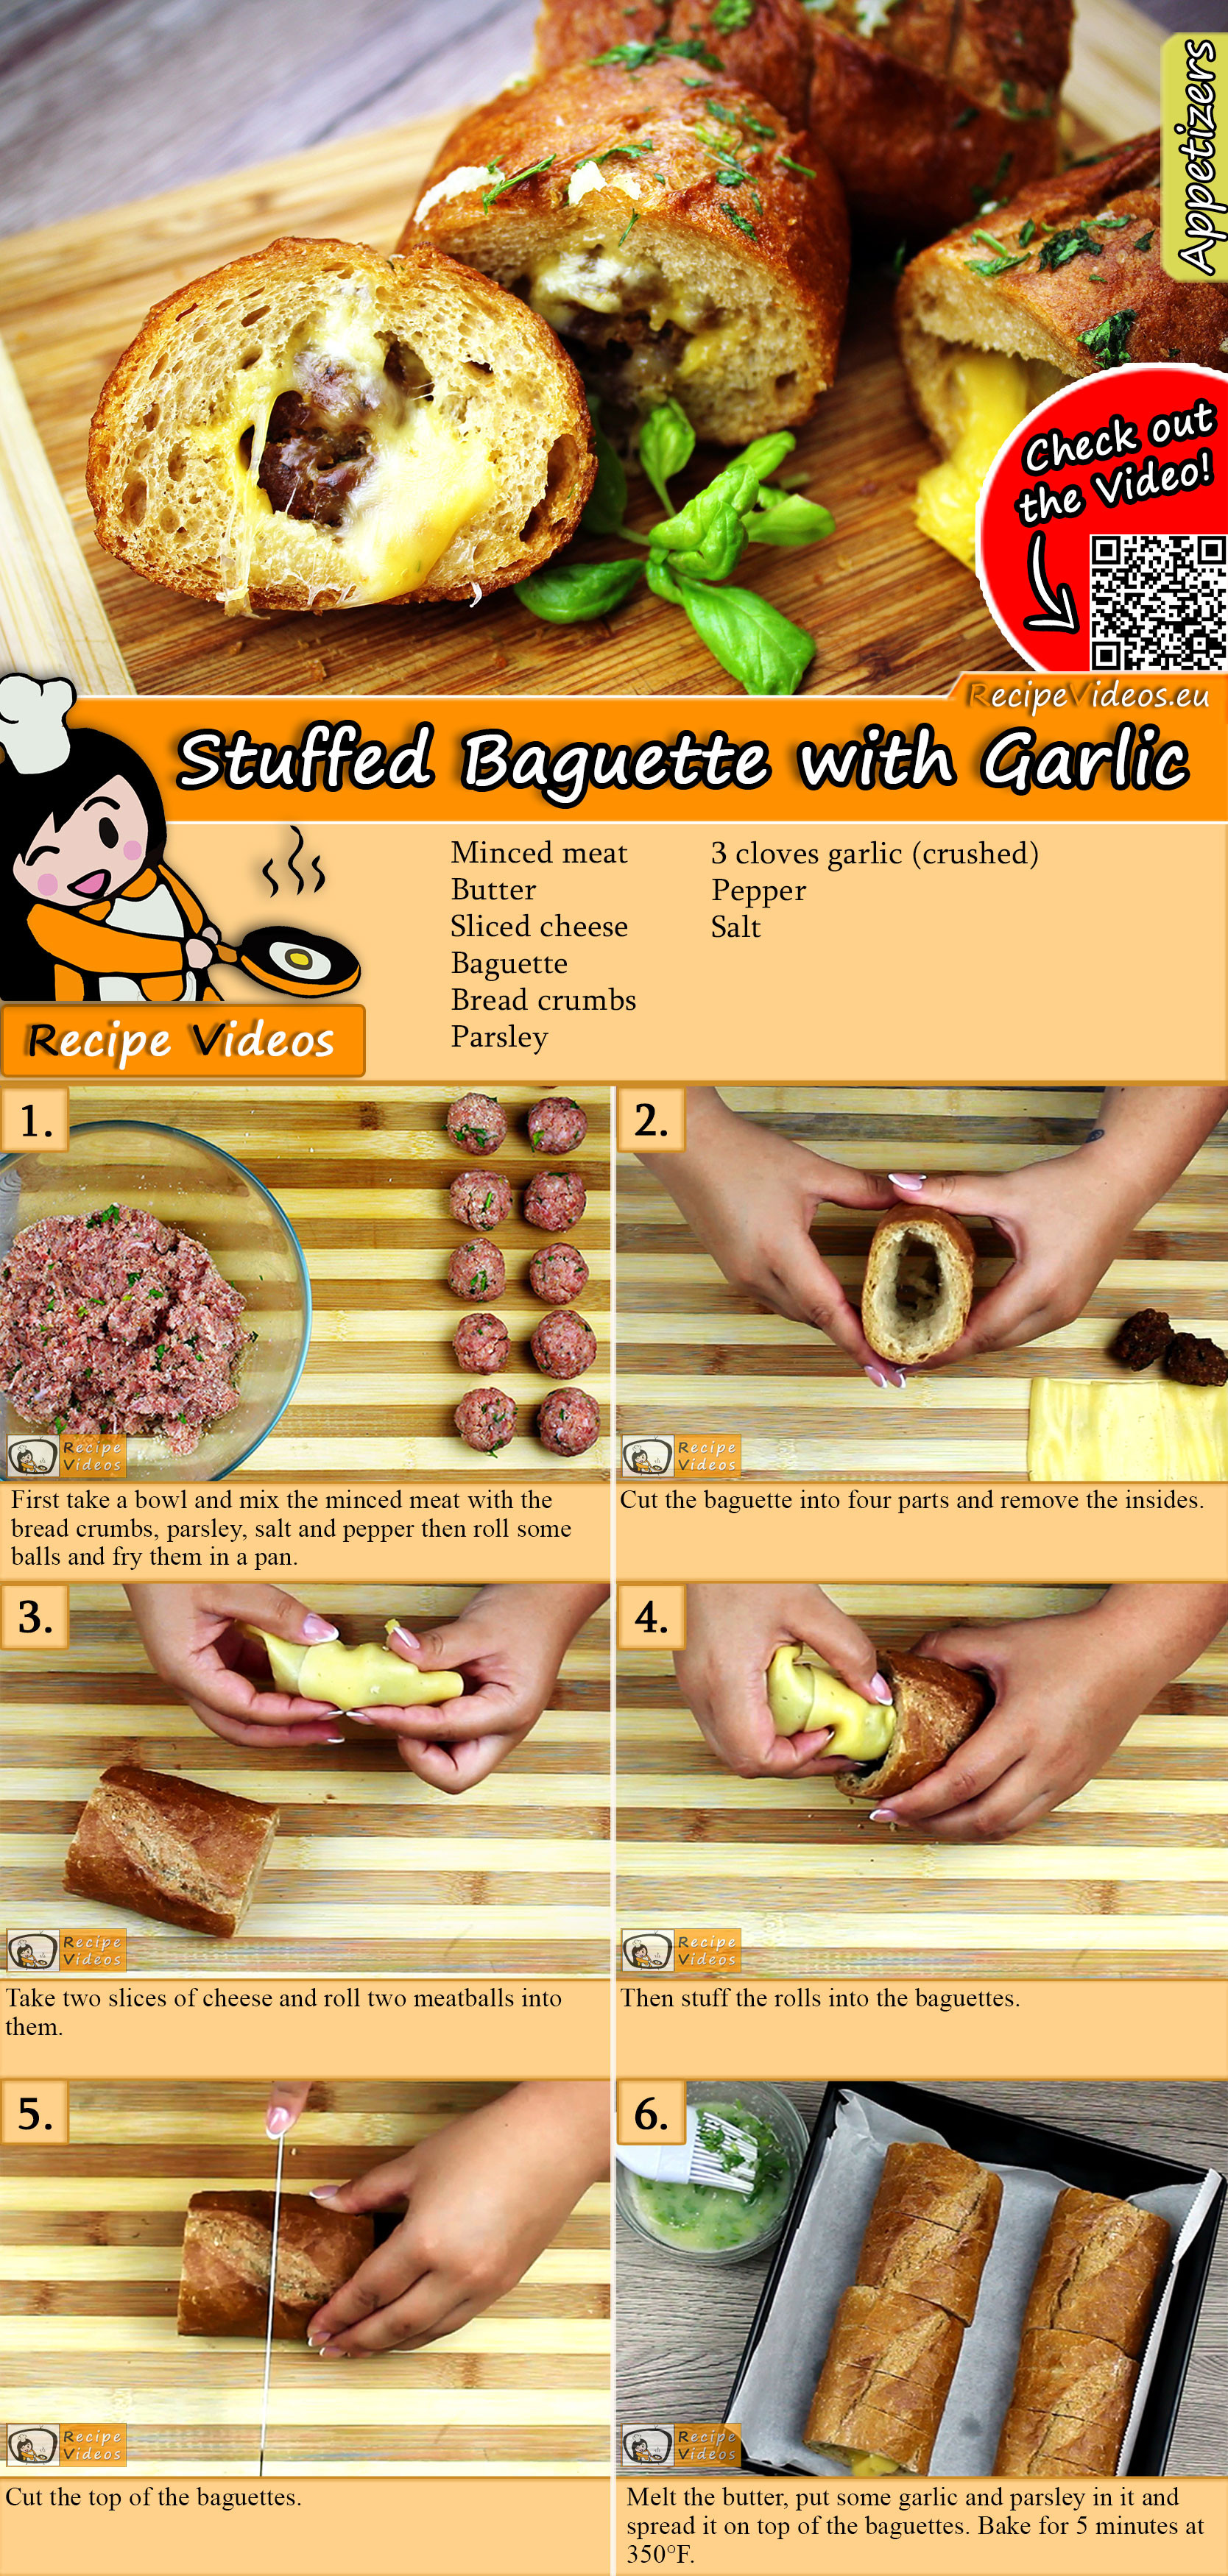 Stuffed baguette with garlic recipe with video